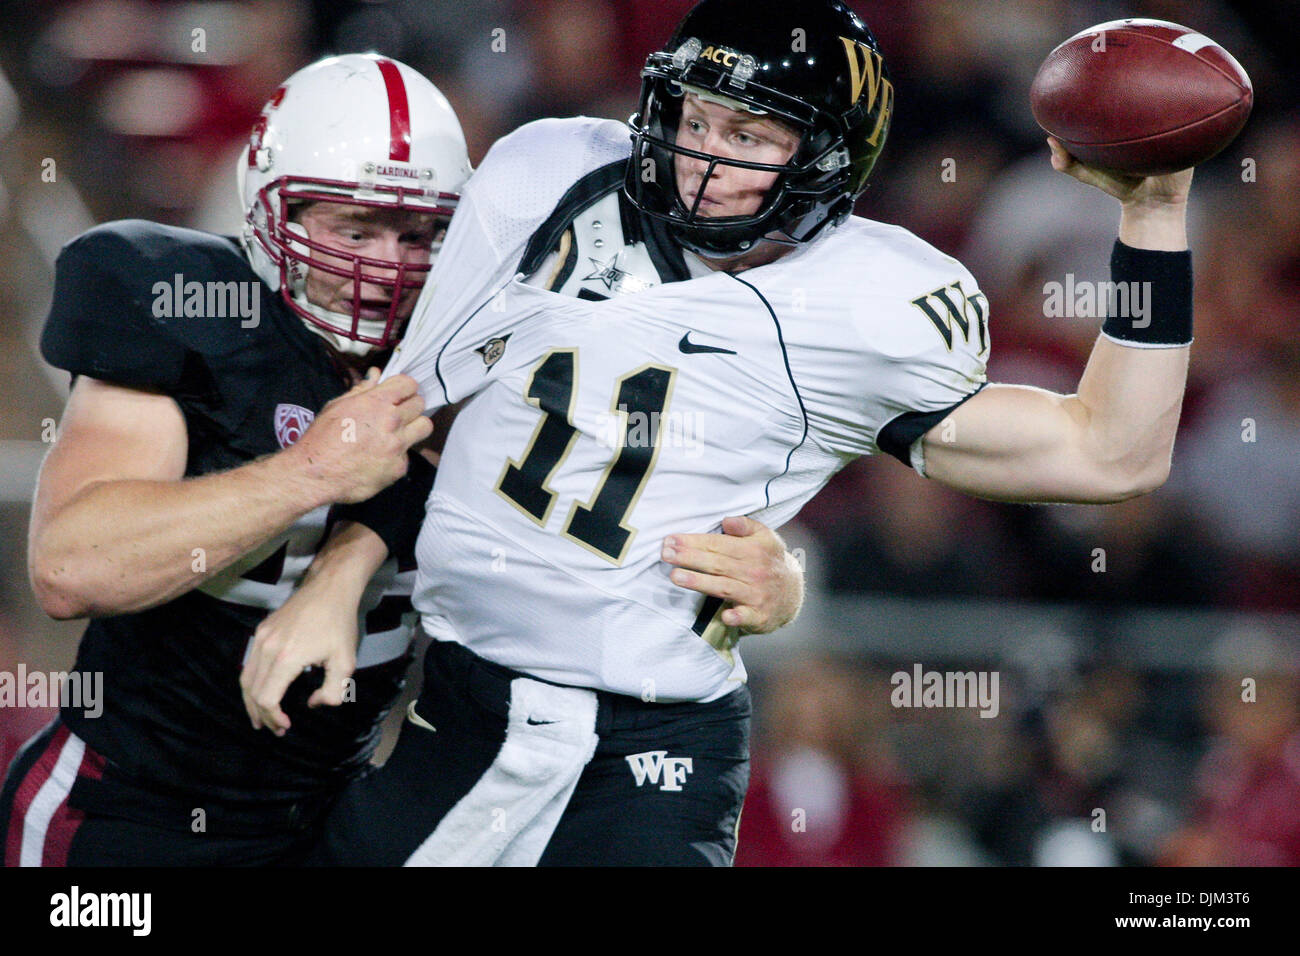 Sept. 18, 2010 - Stanford, California, United States of America - Sept 18, 2010: Stanford, Calif. - Lake Forest QB Tanner Price (11) is sacked by Stanford FB Owen Merecic (48) during game action on Saturday at Stanford Stadium. Stanford leads Wake Forest 41 - 7 late in the first half. (Credit Image: © Konsta Goumenidis/Southcreek Global/ZUMApress.com) Stock Photo